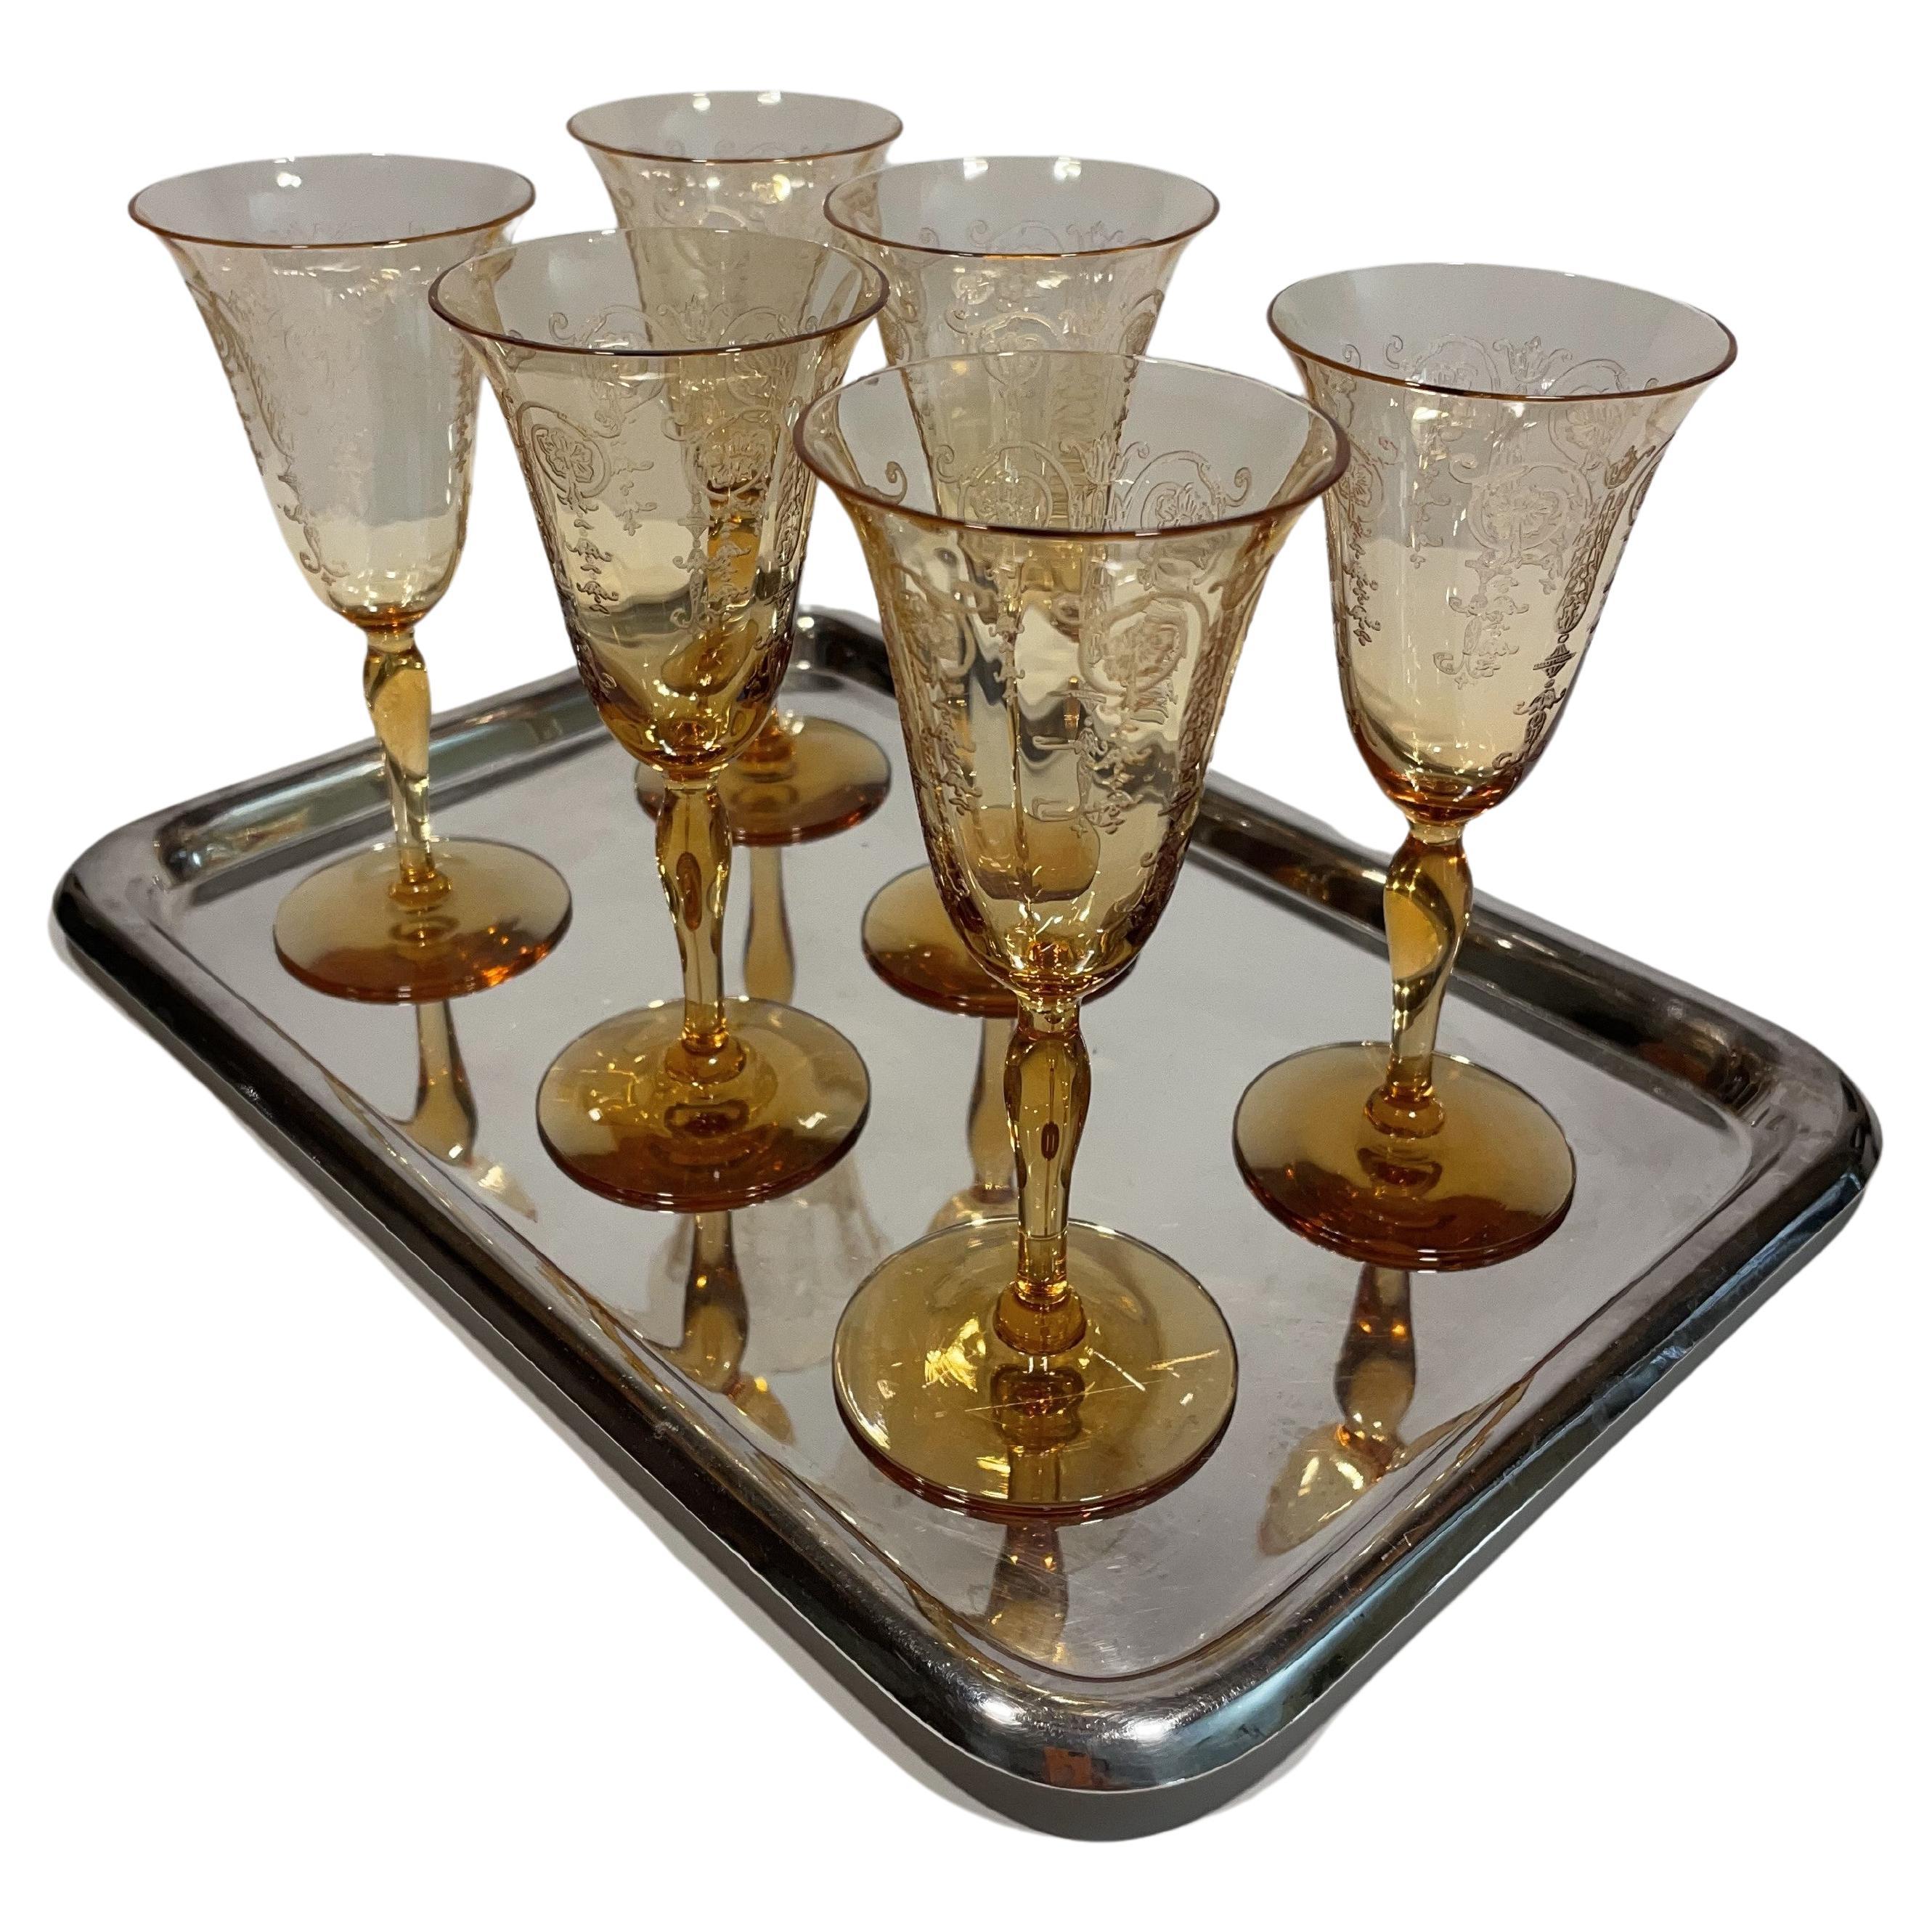 1930s Set of 6 Amber Crystal Aperitif Glasses with Silver-Plate Drinks Tray